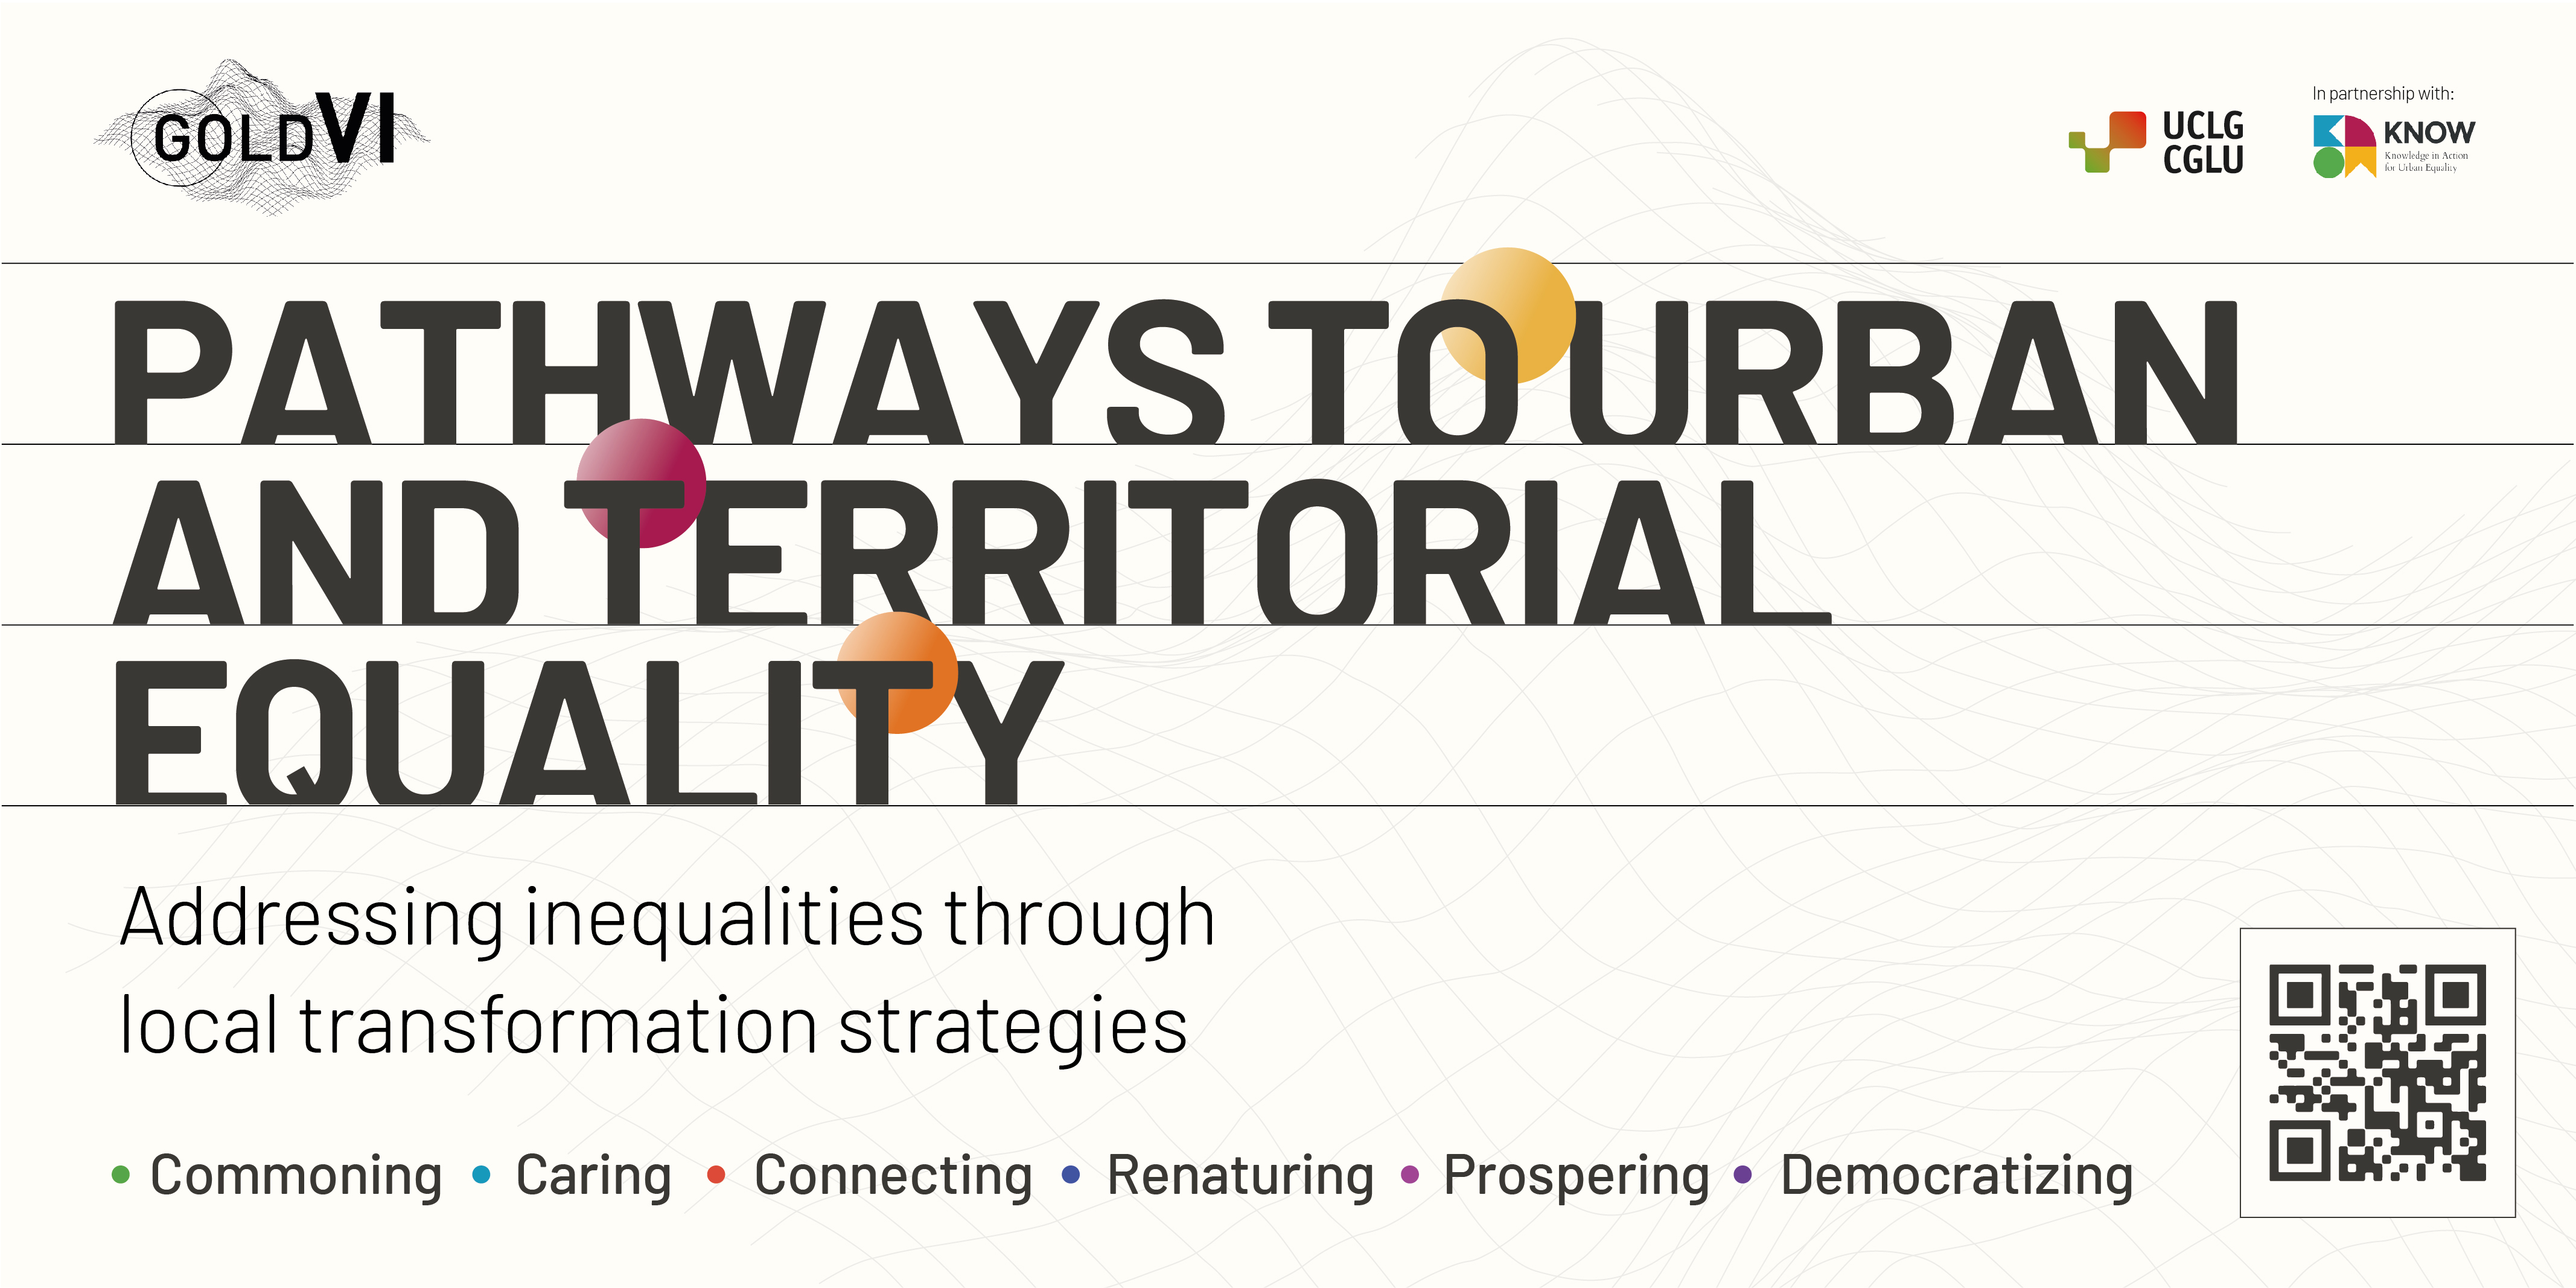 Pathways to urban and territorial equality